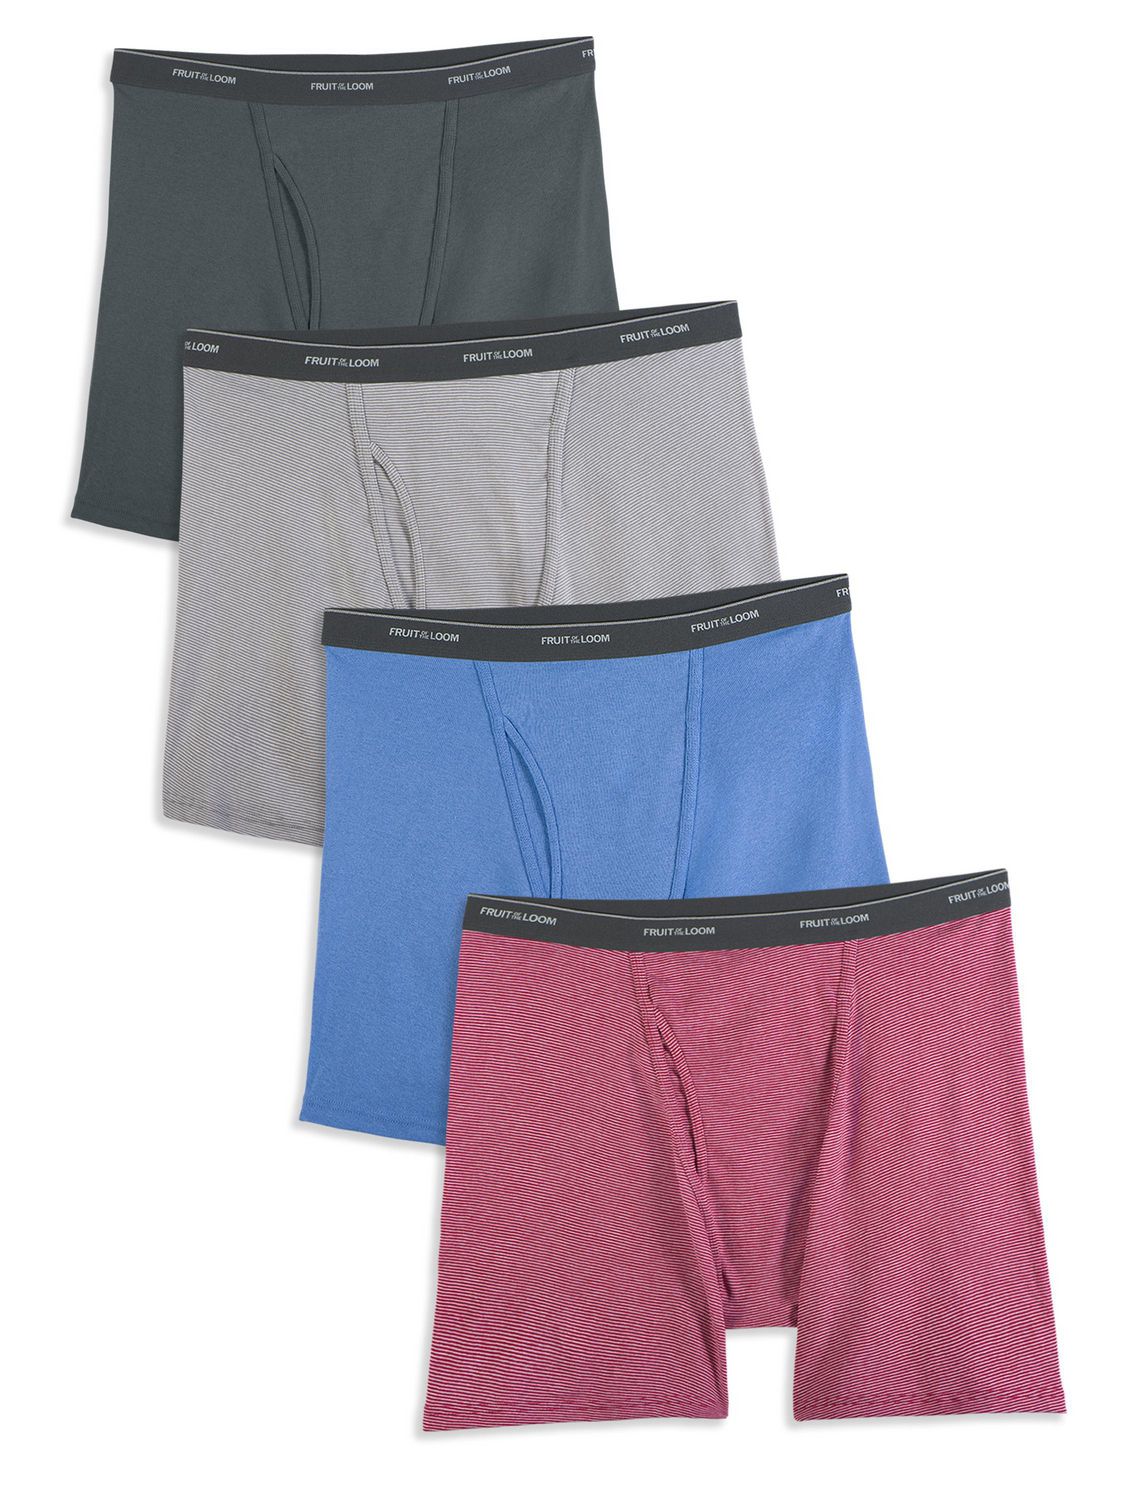 Fruit of the Loom Men's Assorted Blues Boxer Shorts, 4-Pack